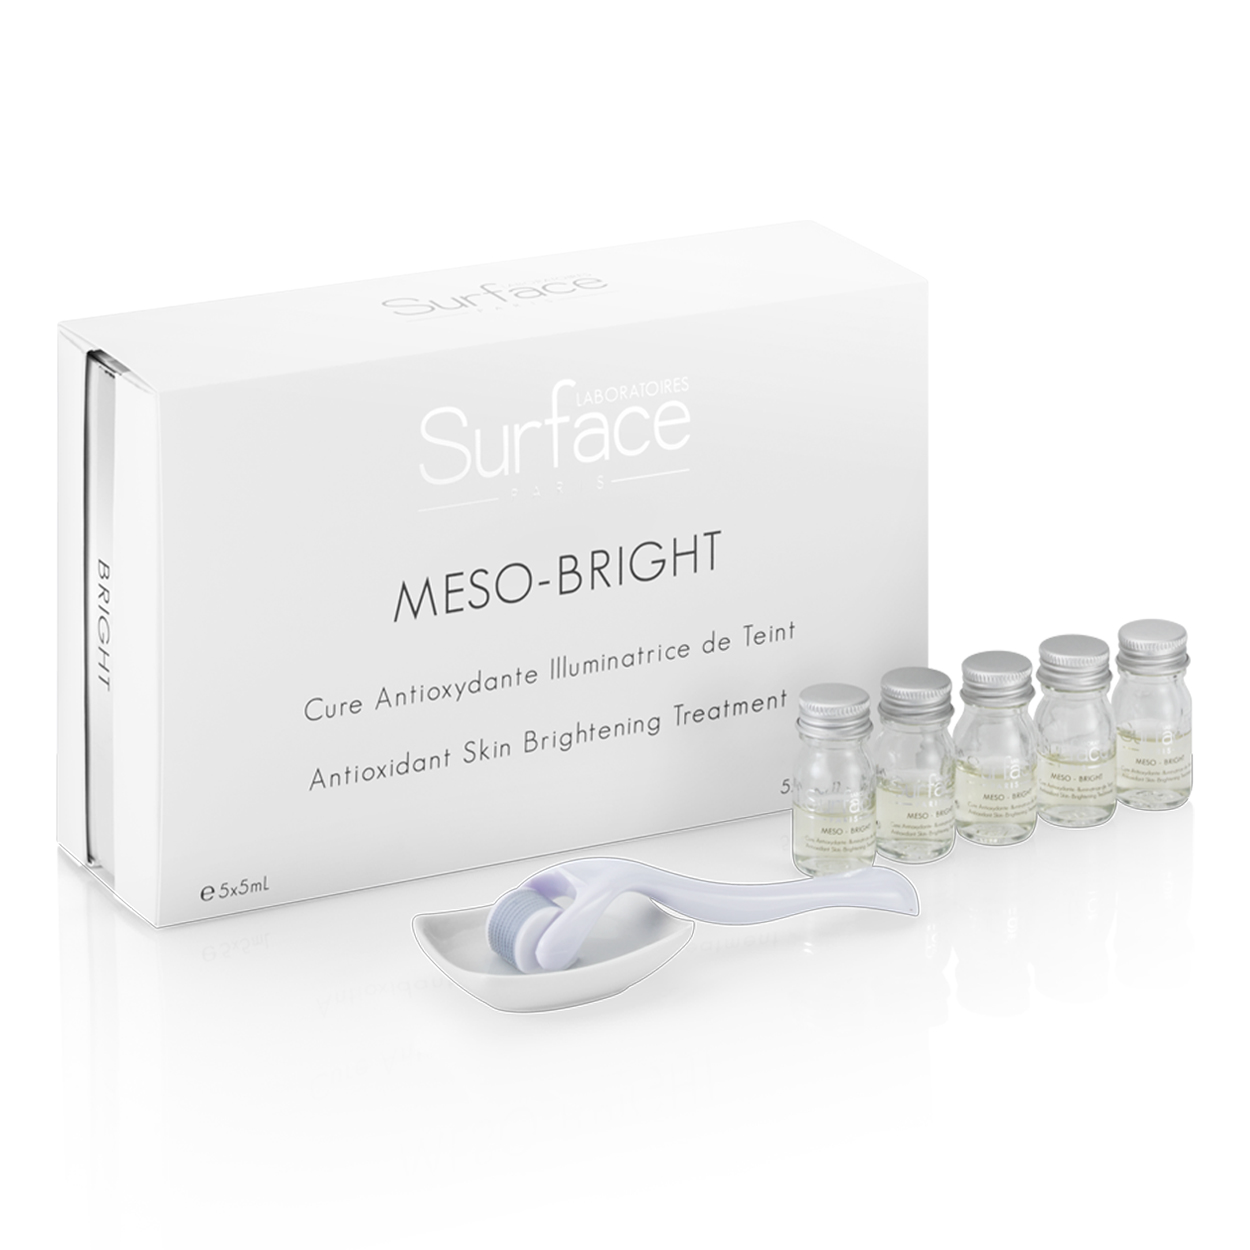 At Home Mesotherapy - MESO-BRIGHT by Laboratoires Surface-Paris